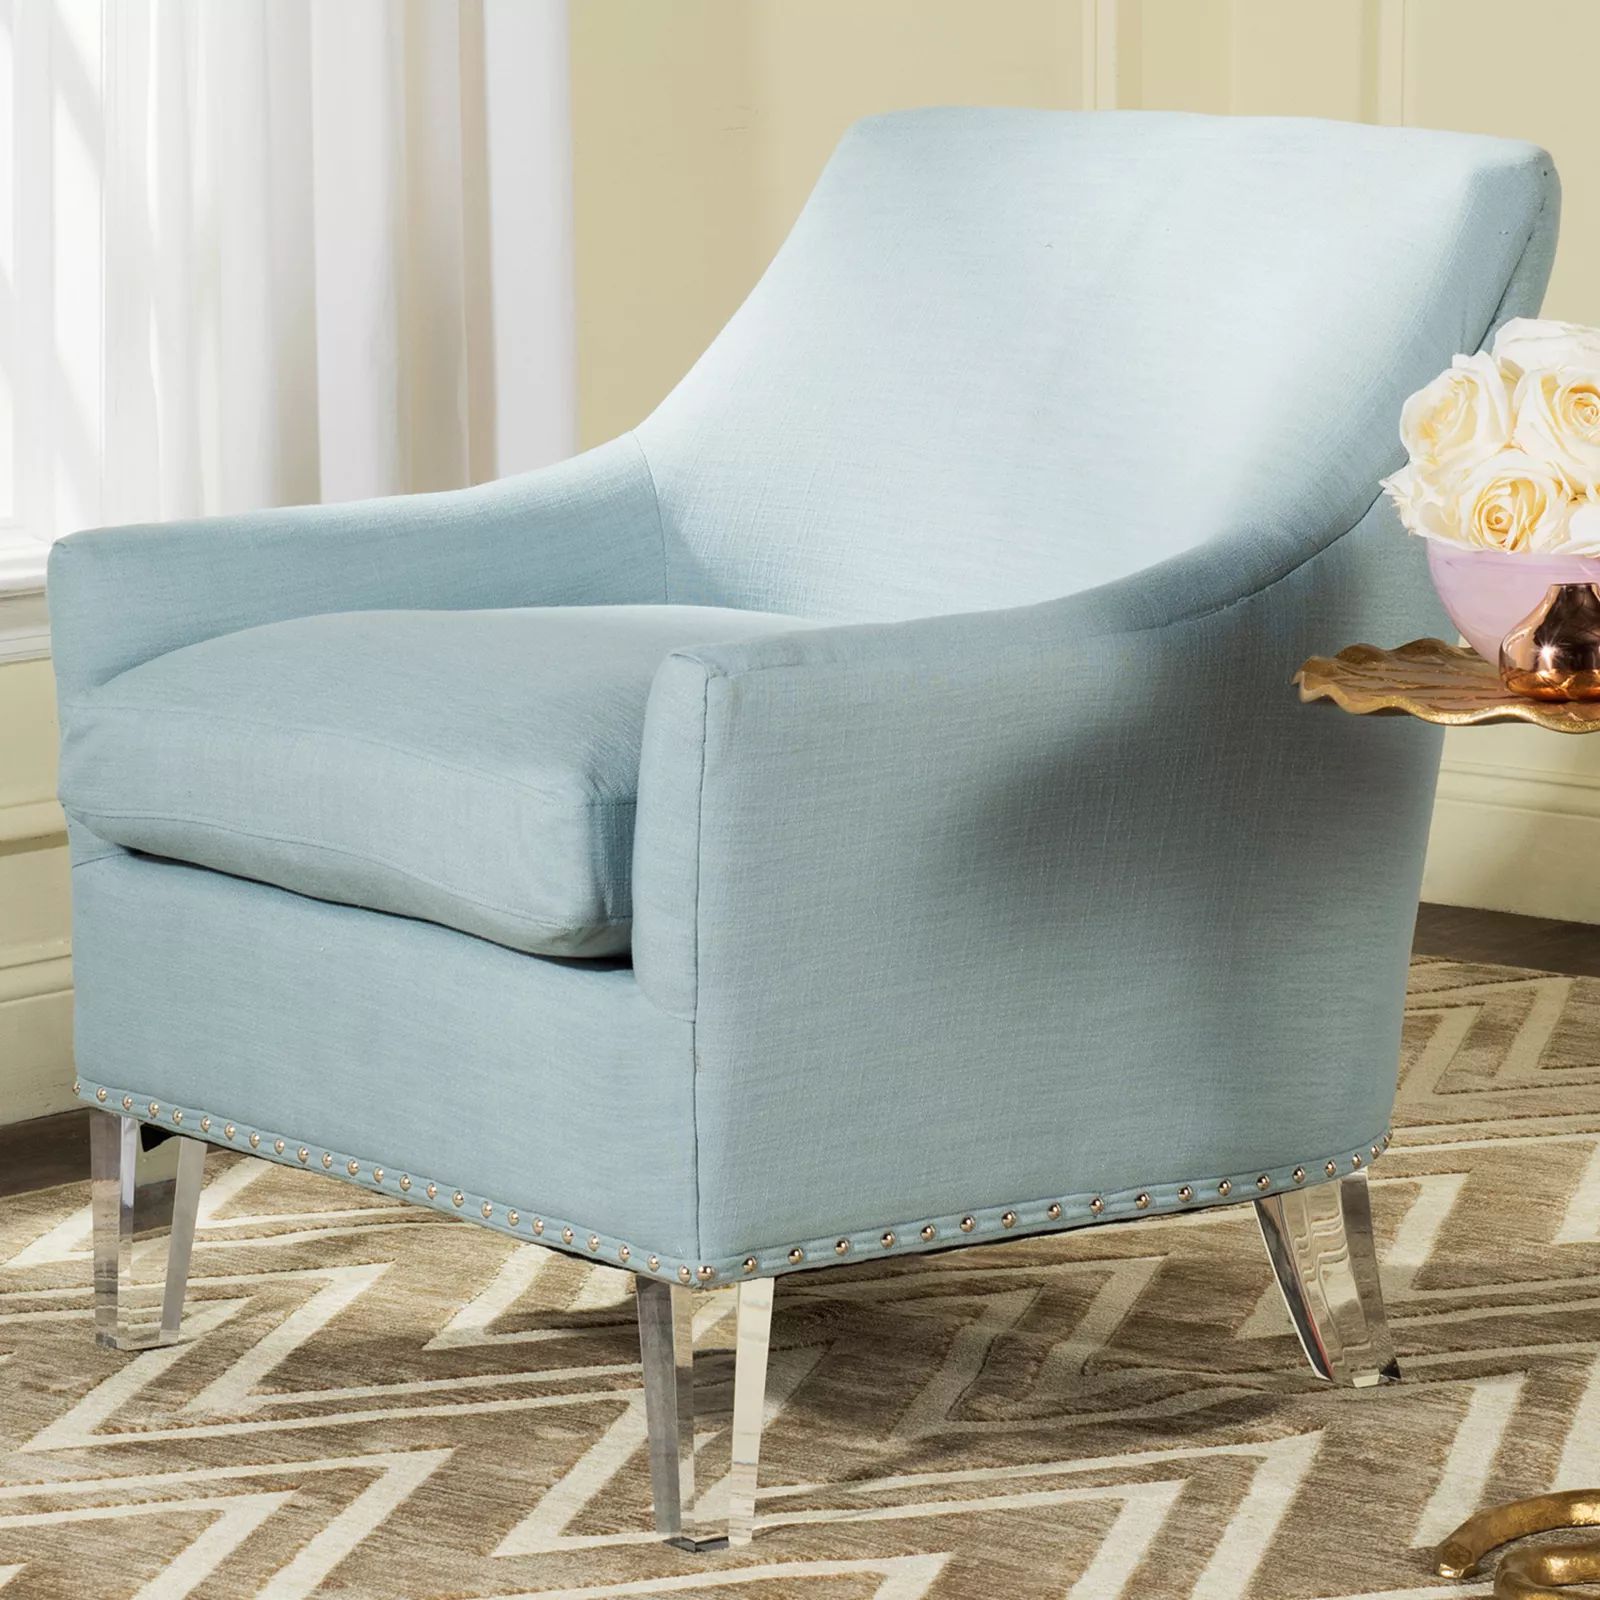 Safavieh Hollywood Glam Sloped Arm Chair, Turquoise/Blue | Kohl's